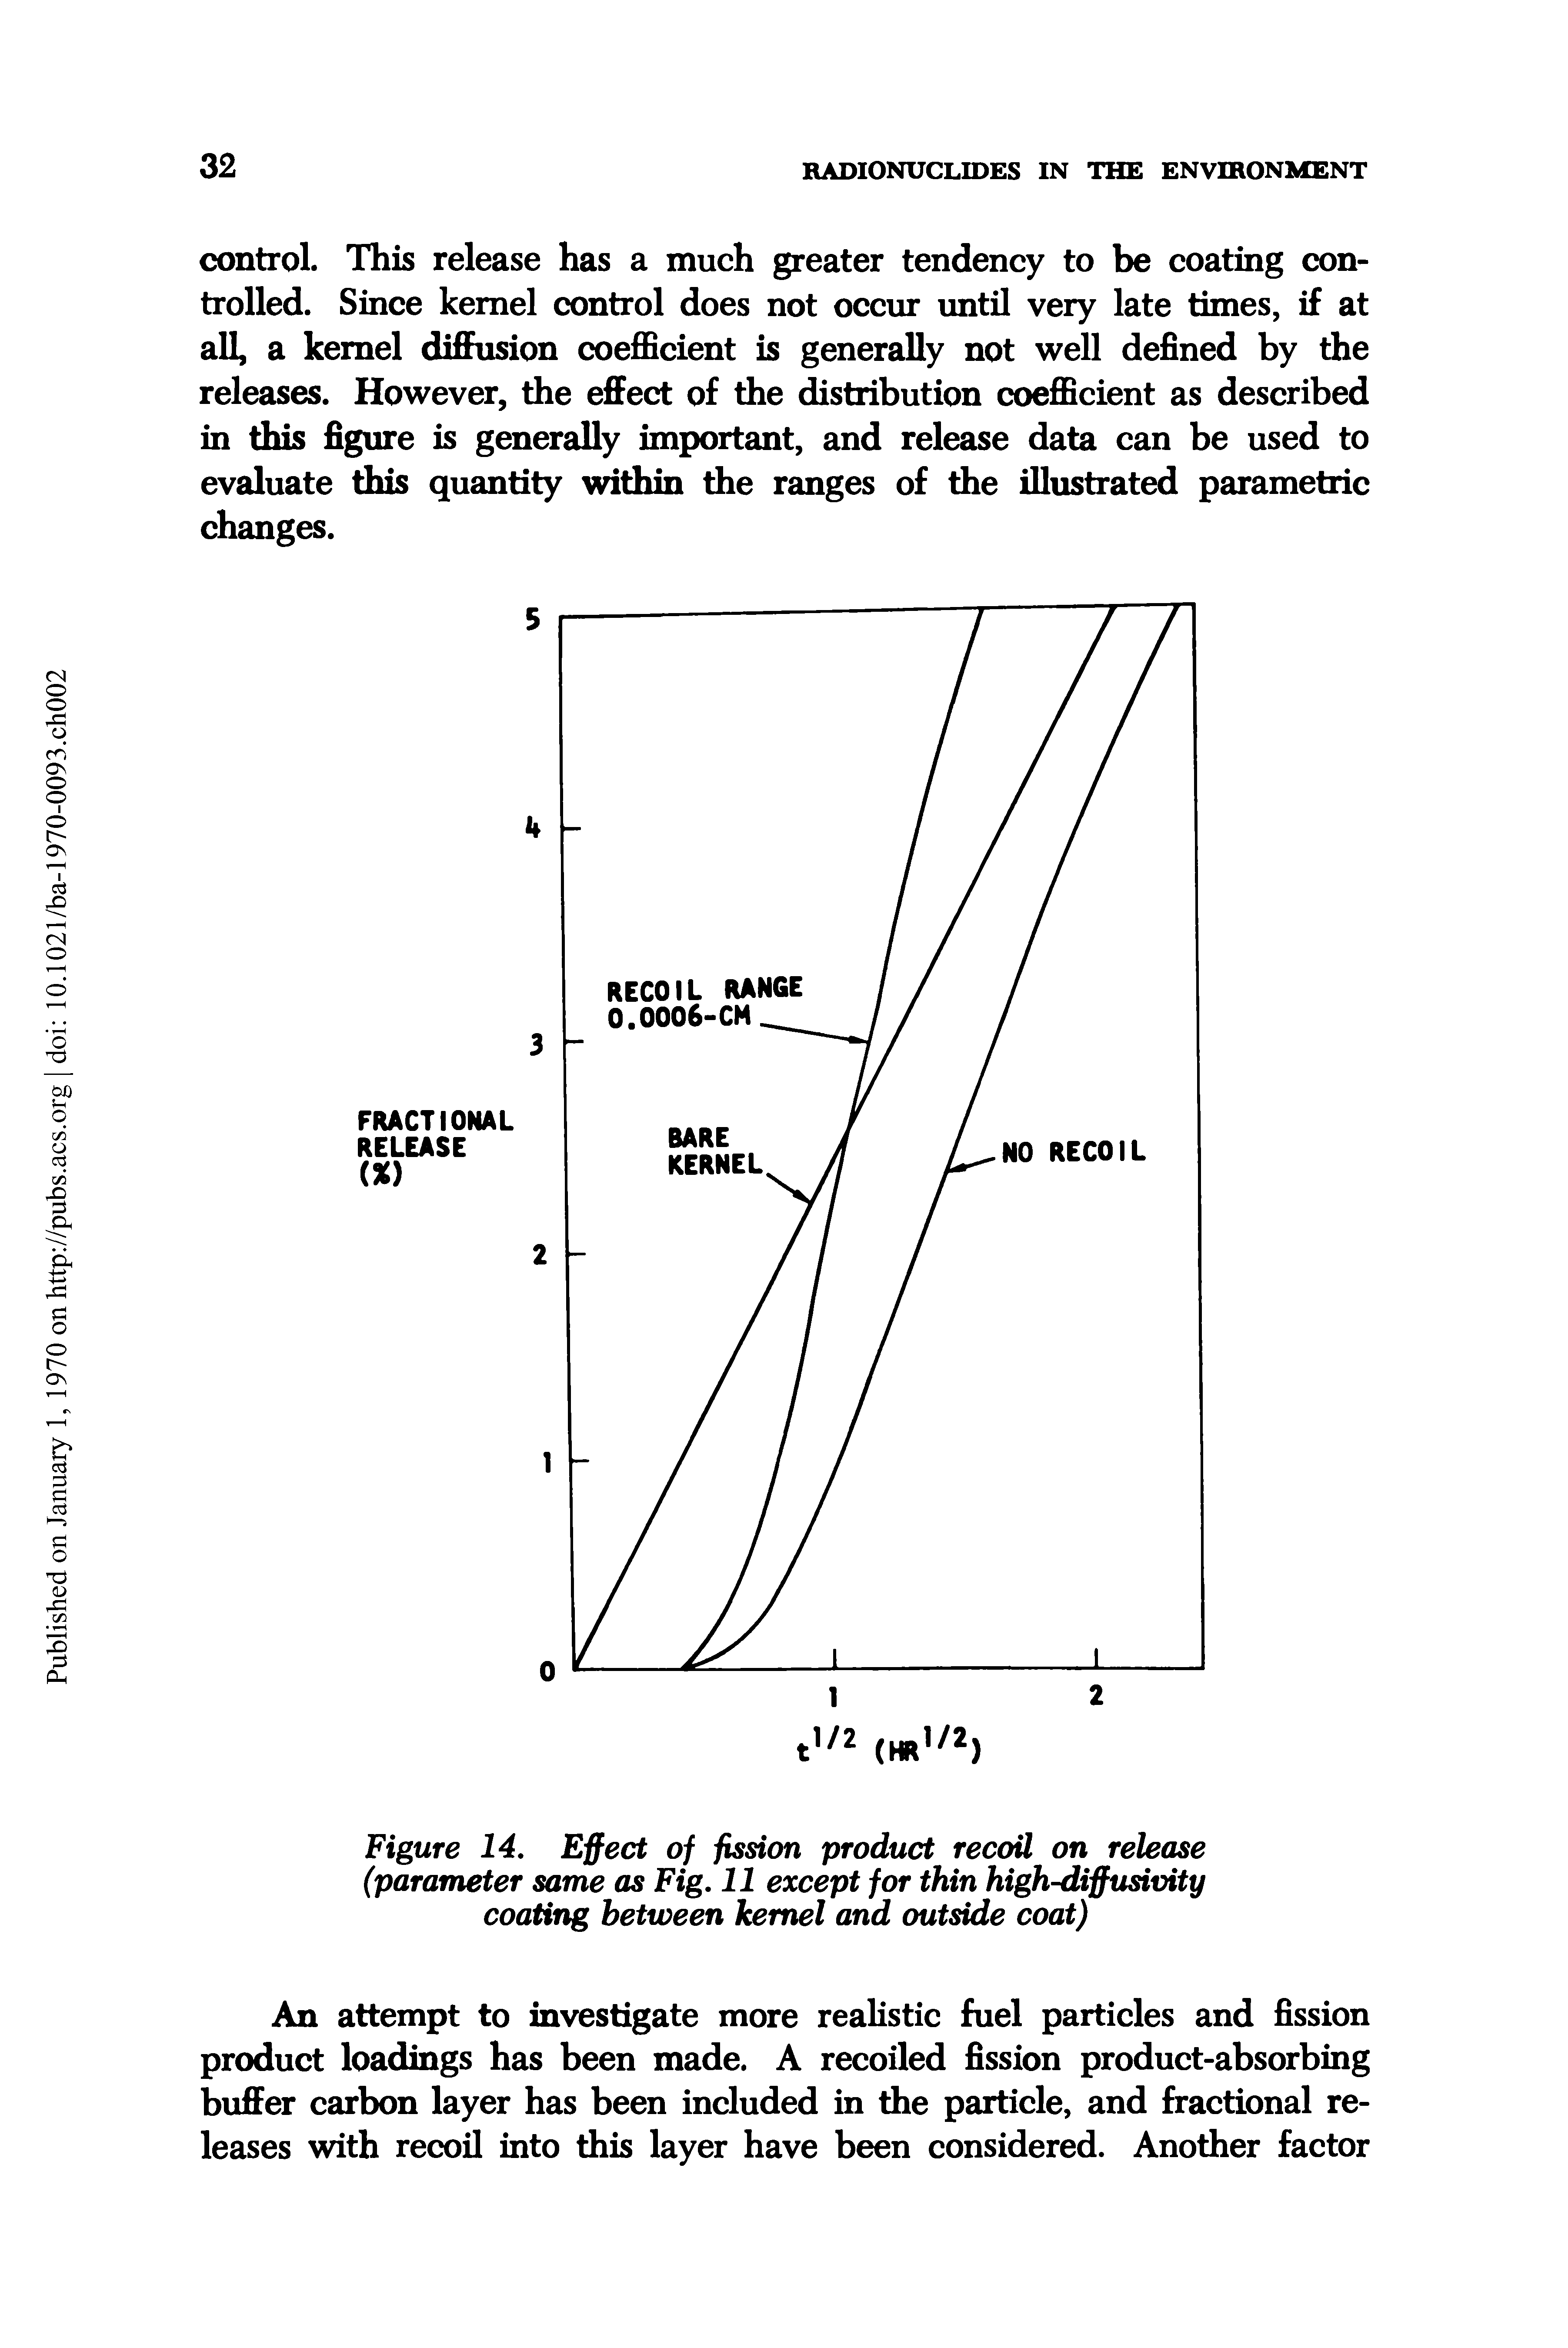 Figure 14. Effect of fission product recoil on release (parameter same as Fig. 11 except for thin high-diffusivity coating between kernel and outside coat)...